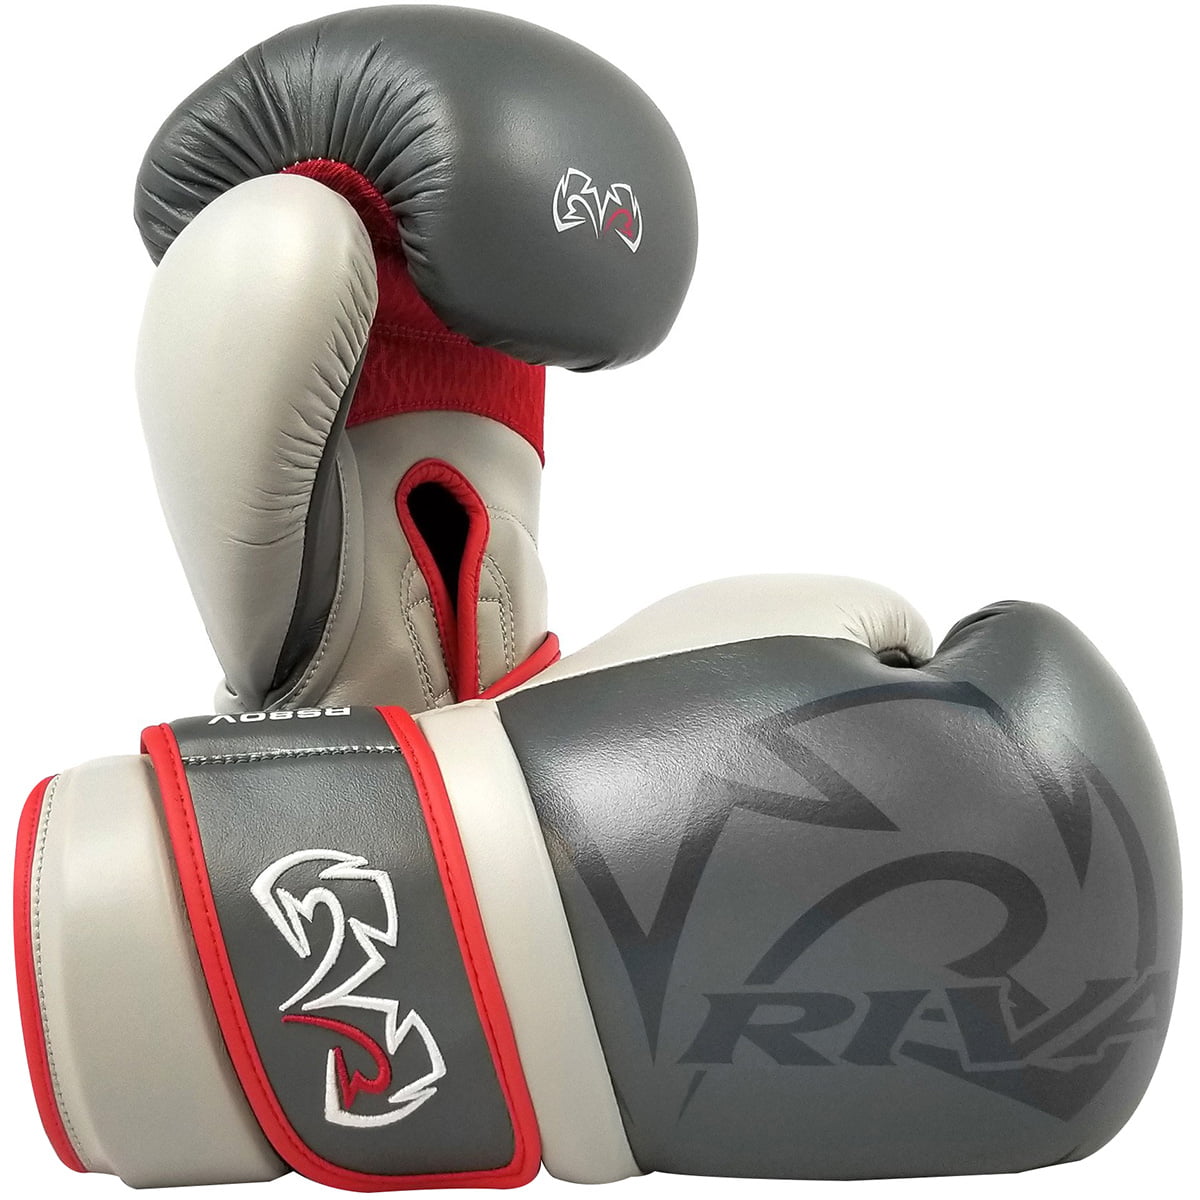 Rival Boxing Gloves RS100 Professional Sparring Training Workout Gloves Elite 